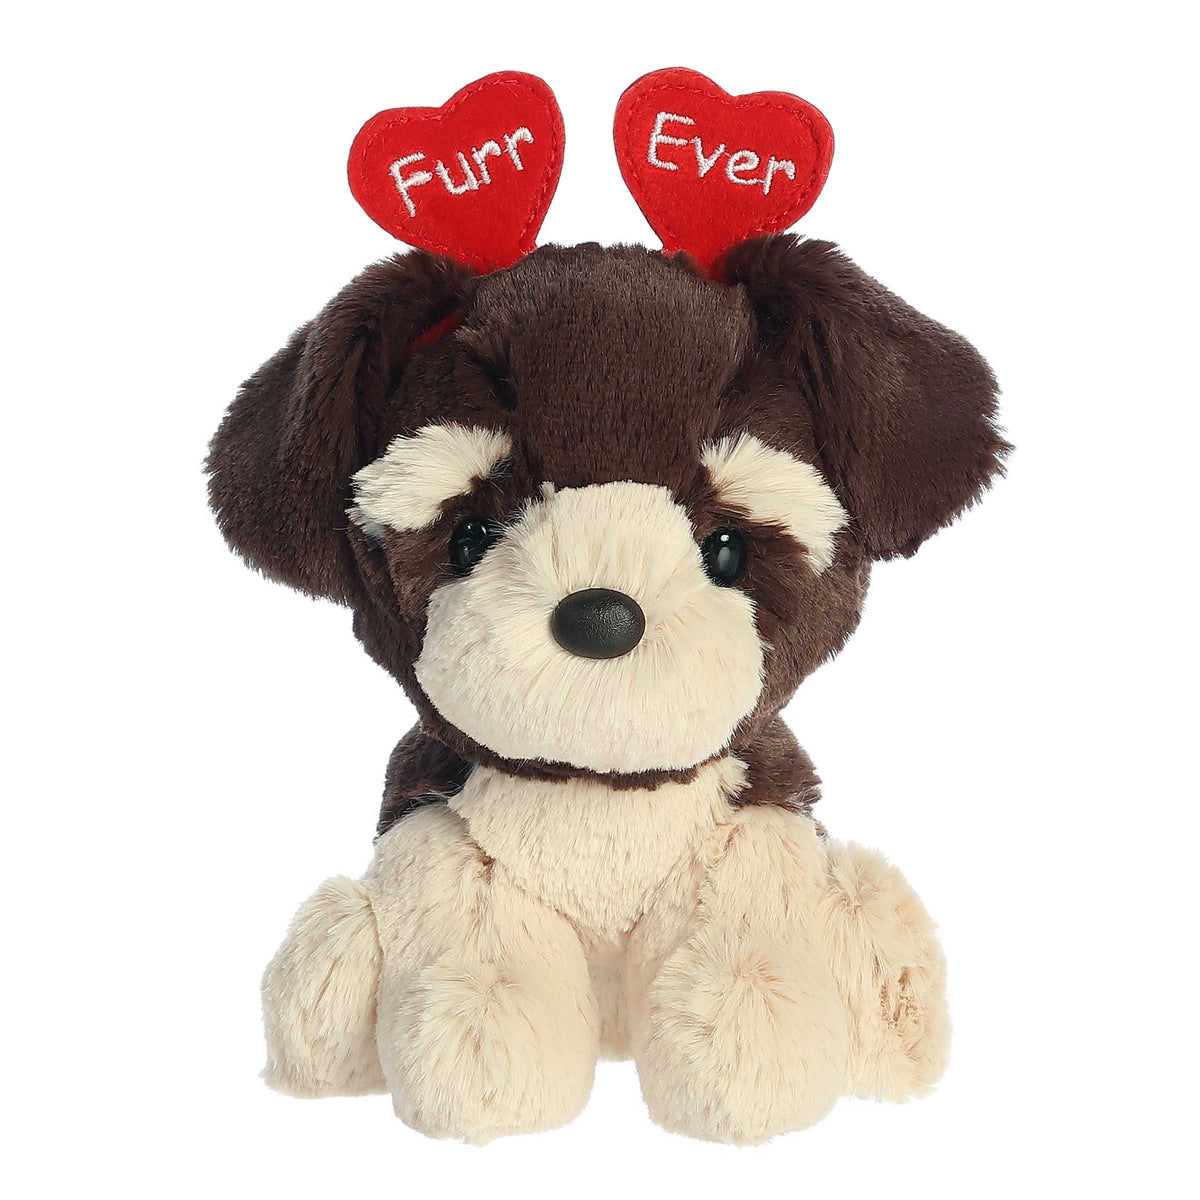 Rottweiler plush from Love On The Mind, with a heart headband and loving expression saying "Furr Ever" for Valentine's Day